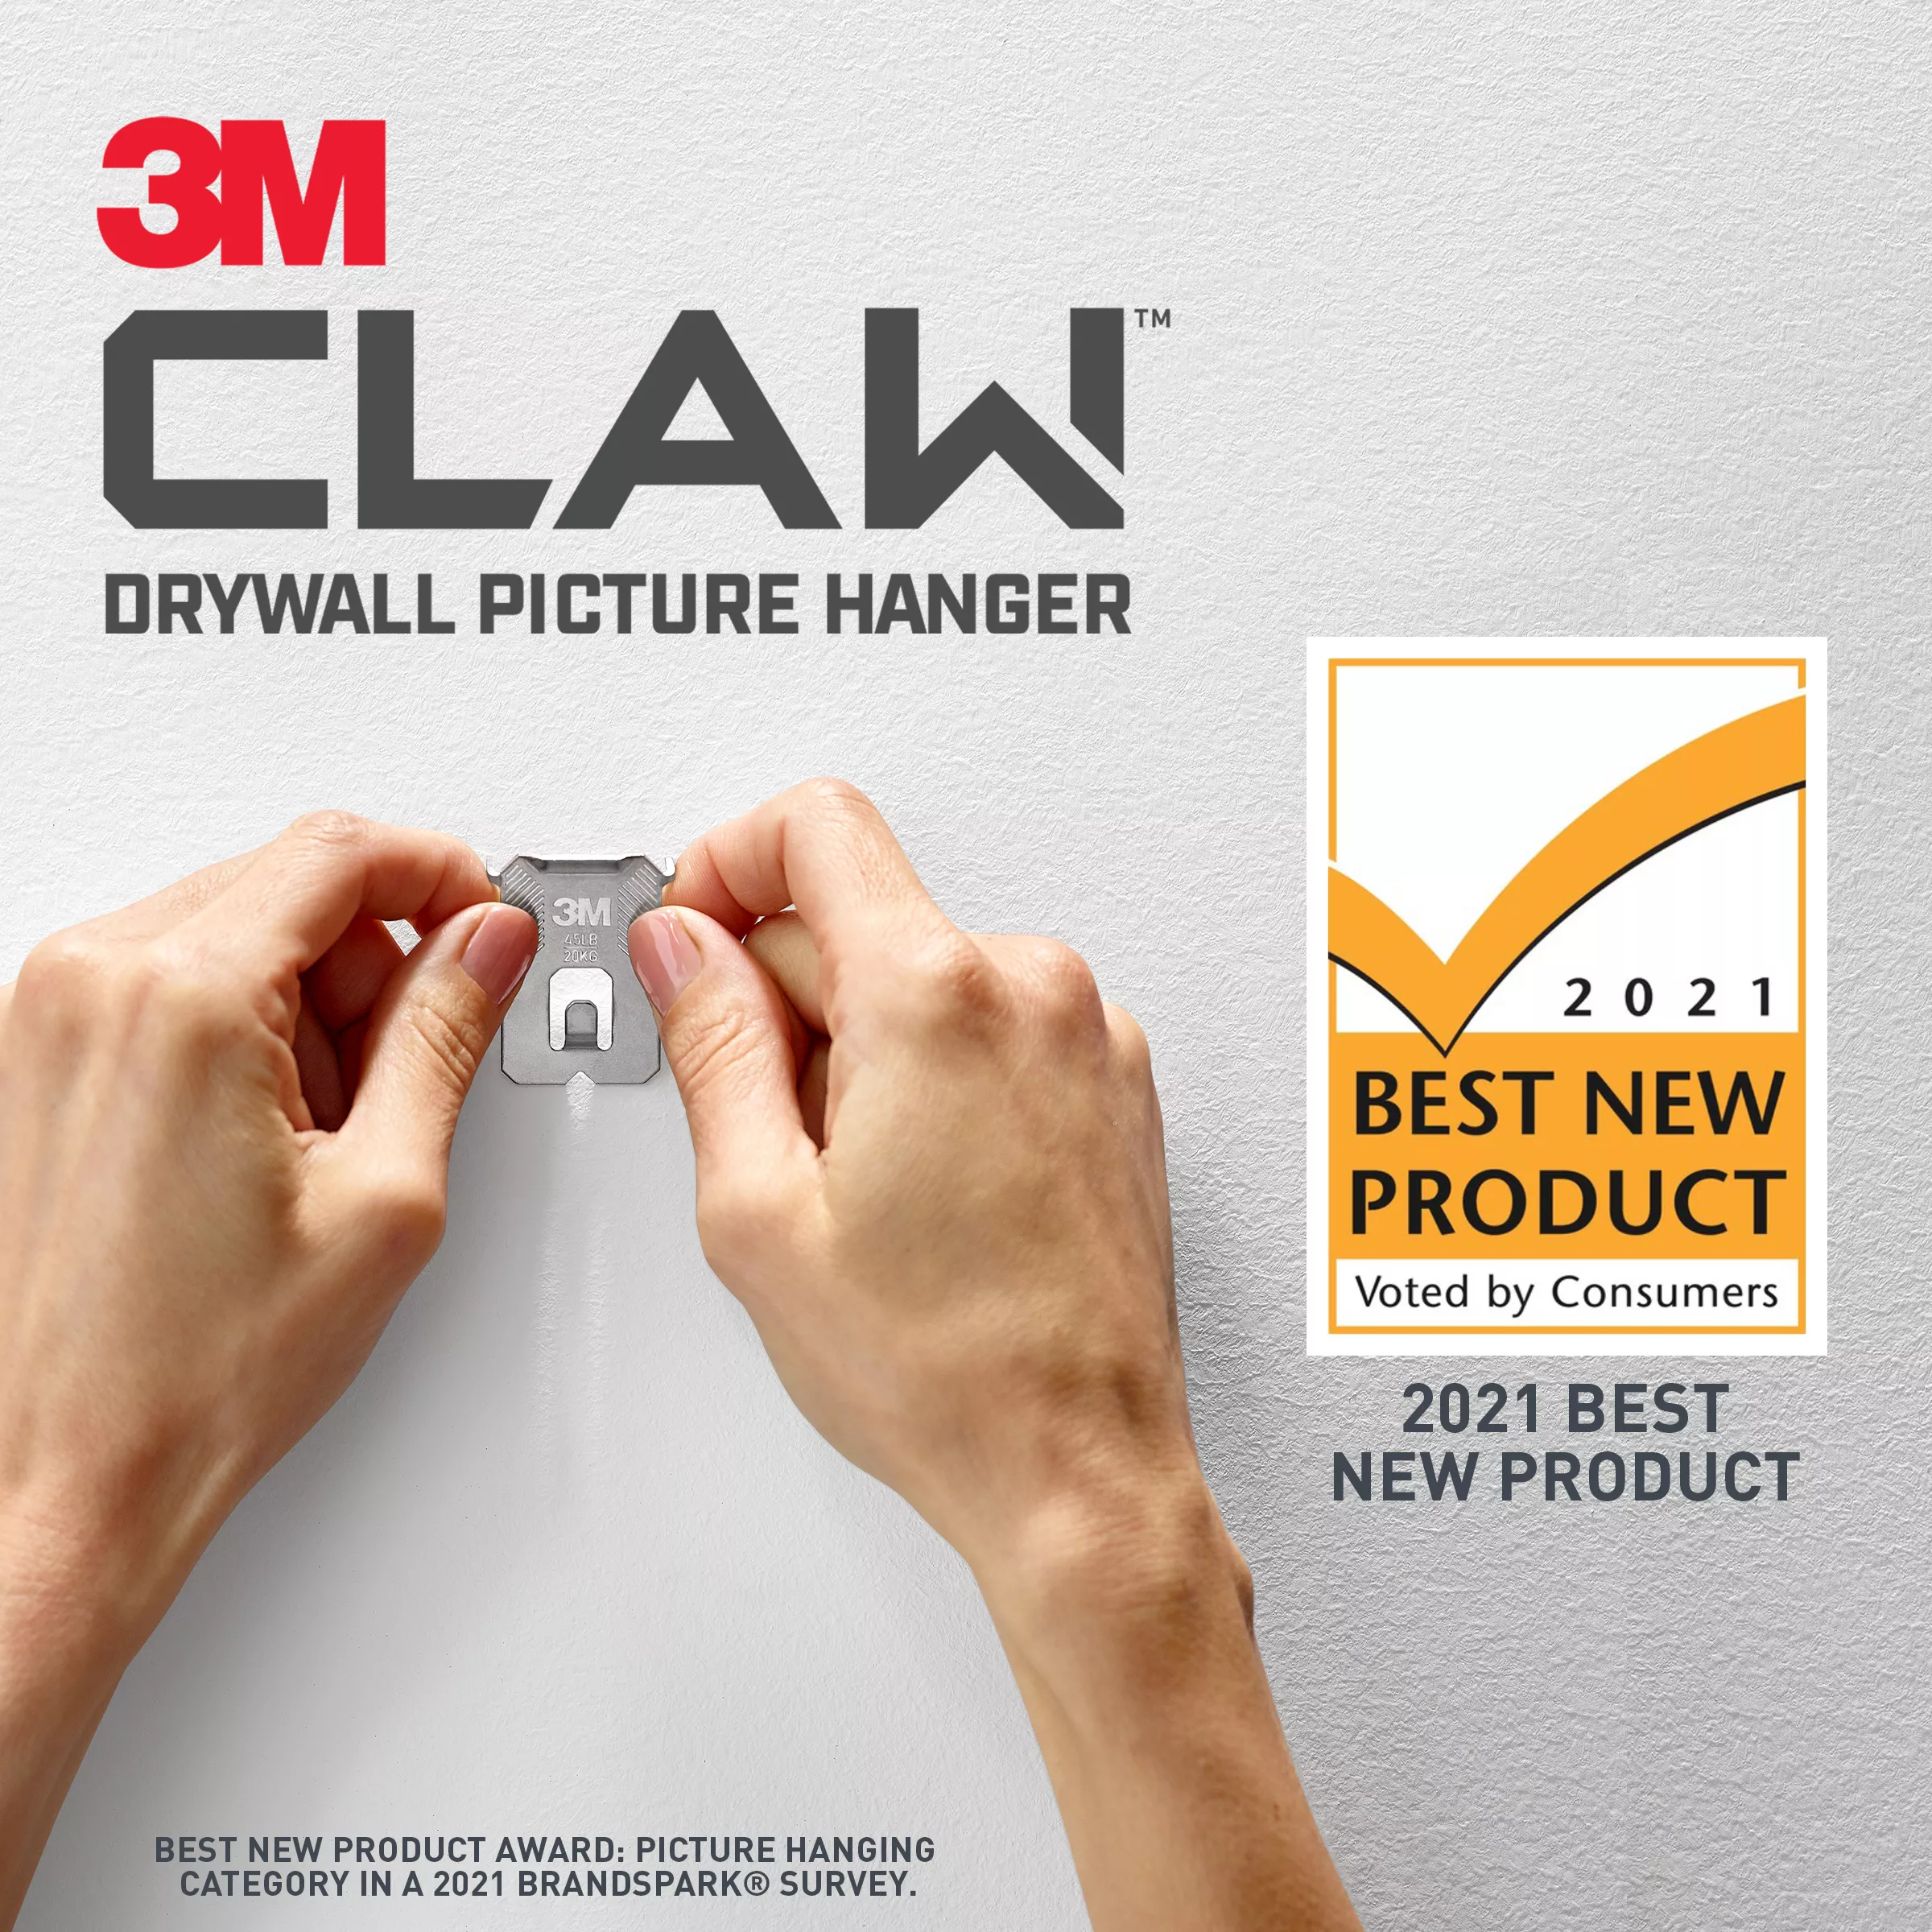 SKU 7100227268 | 3M CLAW™ Drywall Picture Hanger 15 lb with Temporary Spot Marker 3PH15M-5EF